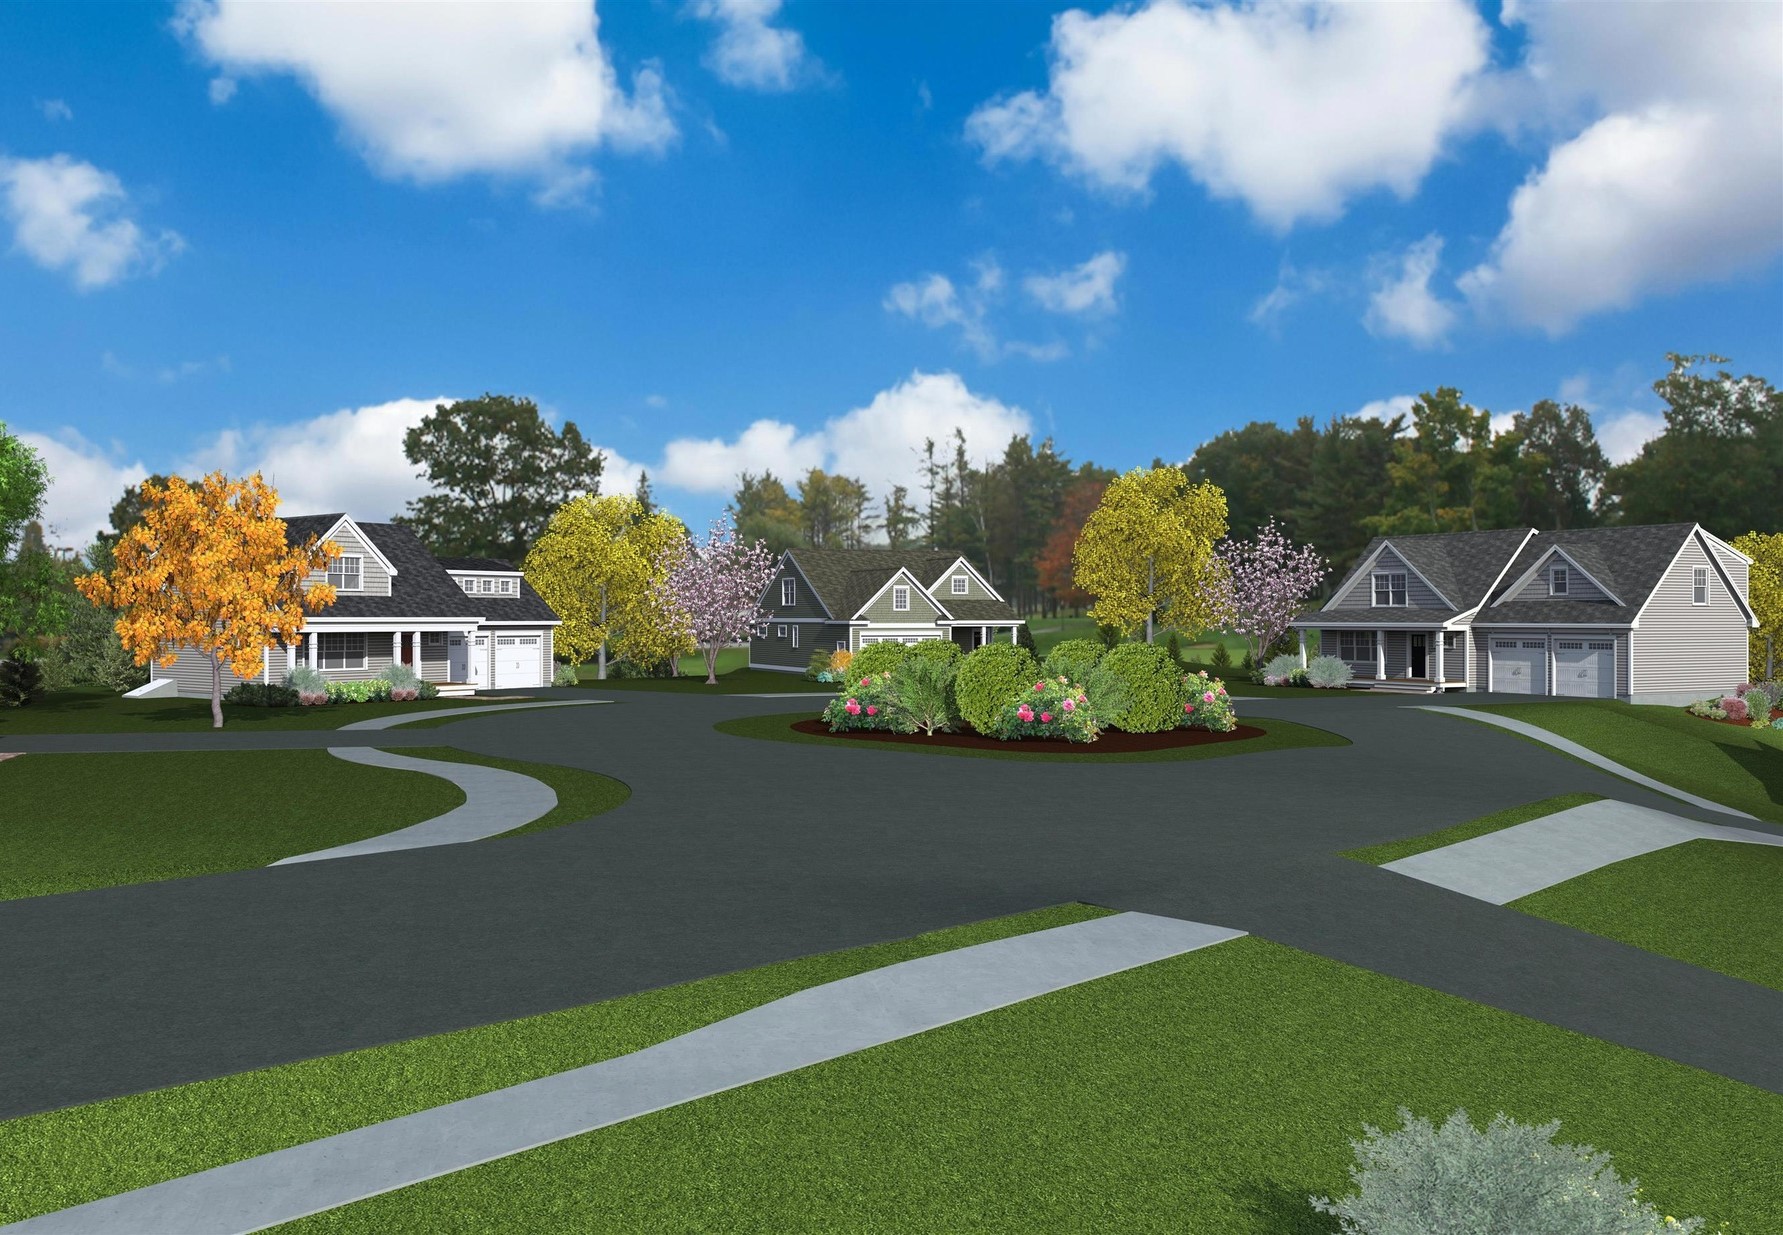 3d-exterior-design-rendering-community-homes-manchester-new-hampshire